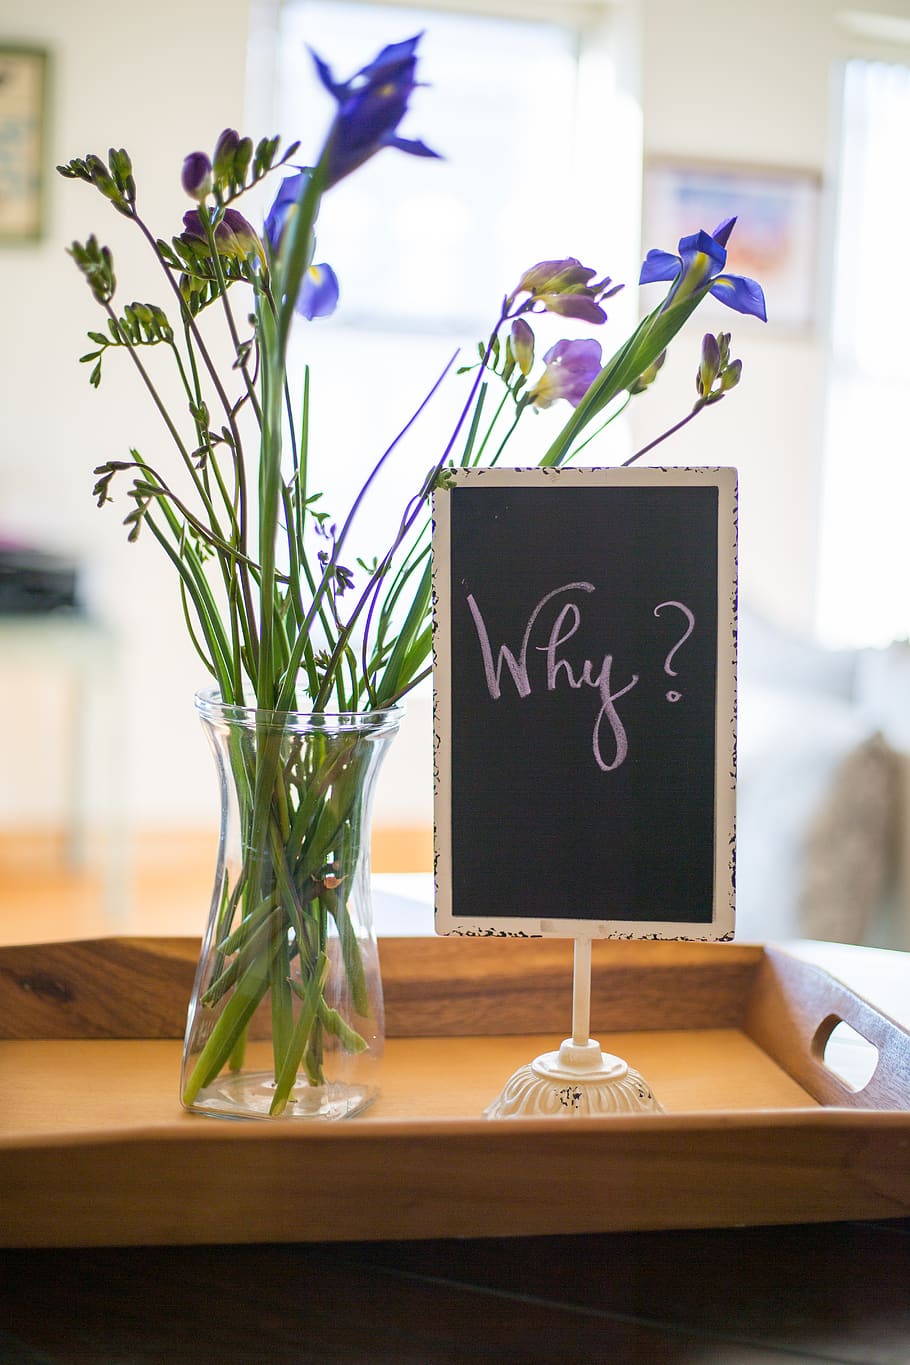 words, sign, text, signage, flowers, vase, reason, business, concept, curiosity